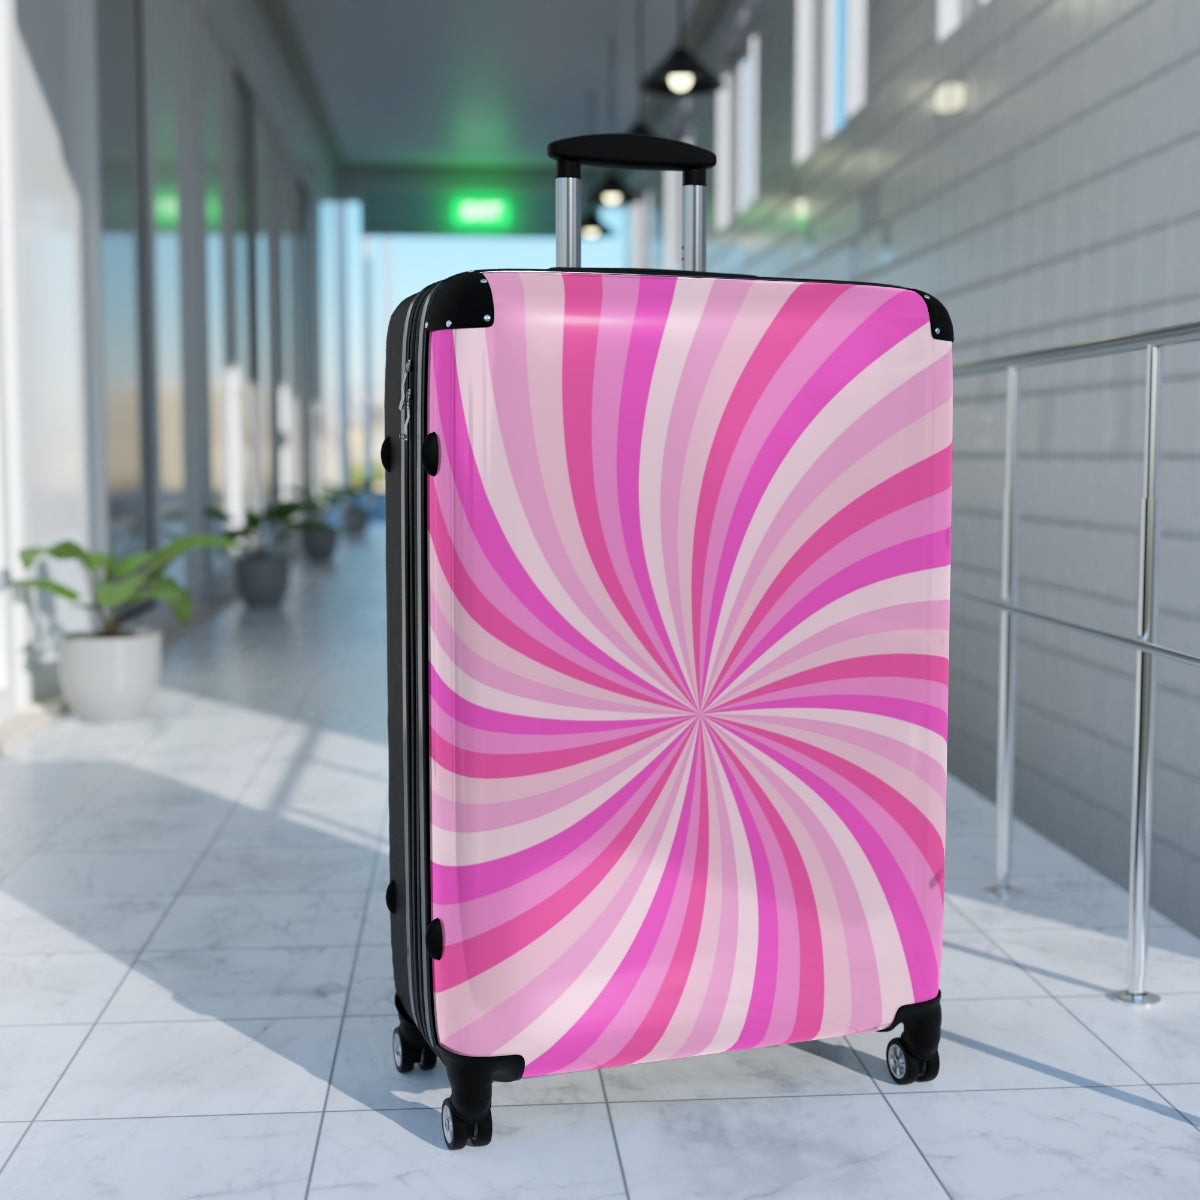 KIDS CARRY-ON Luggage Personalised | Pink Swirl | Cabin Suitcase | Artistic Designs | Double Wheeled Spinner